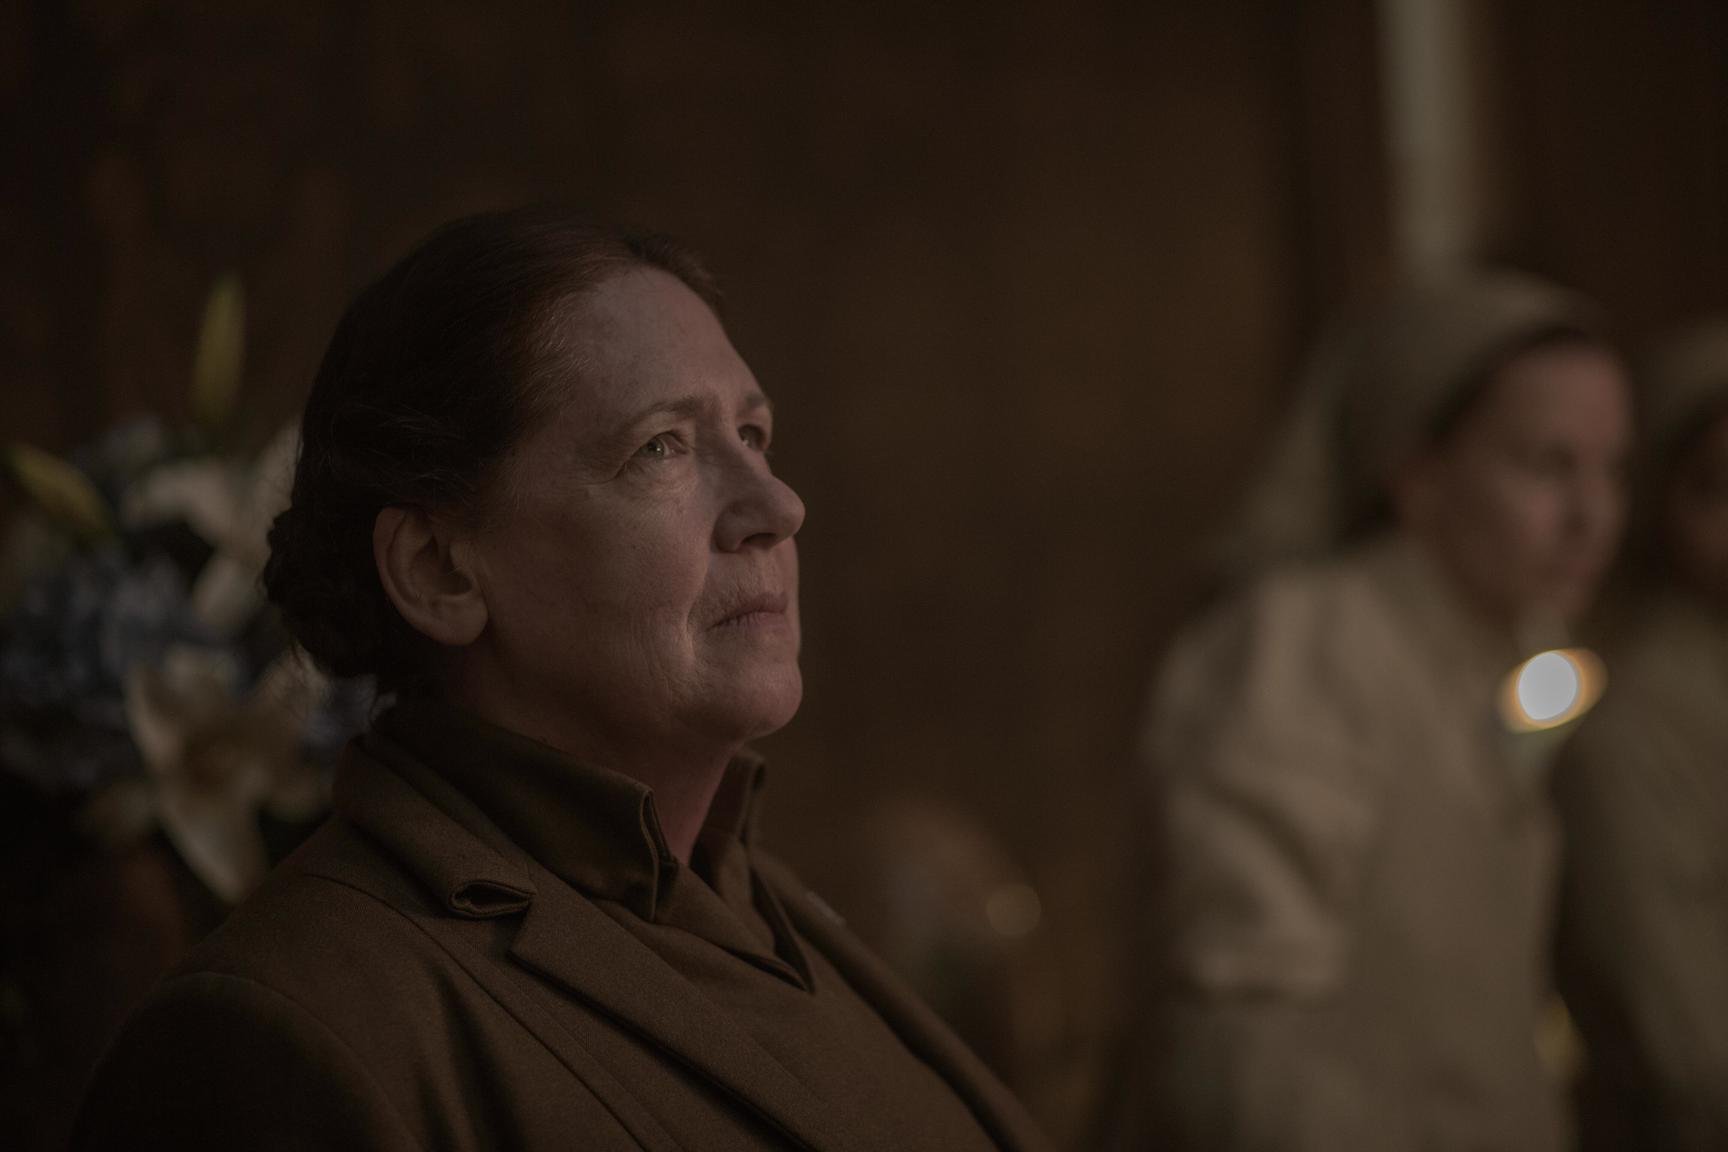 Ann Dowd, a member of 'The Handmaid's Tale' cast, playing Aunt Lydia in season 3. Aunt Lydia is looking up as someone speaks to her.